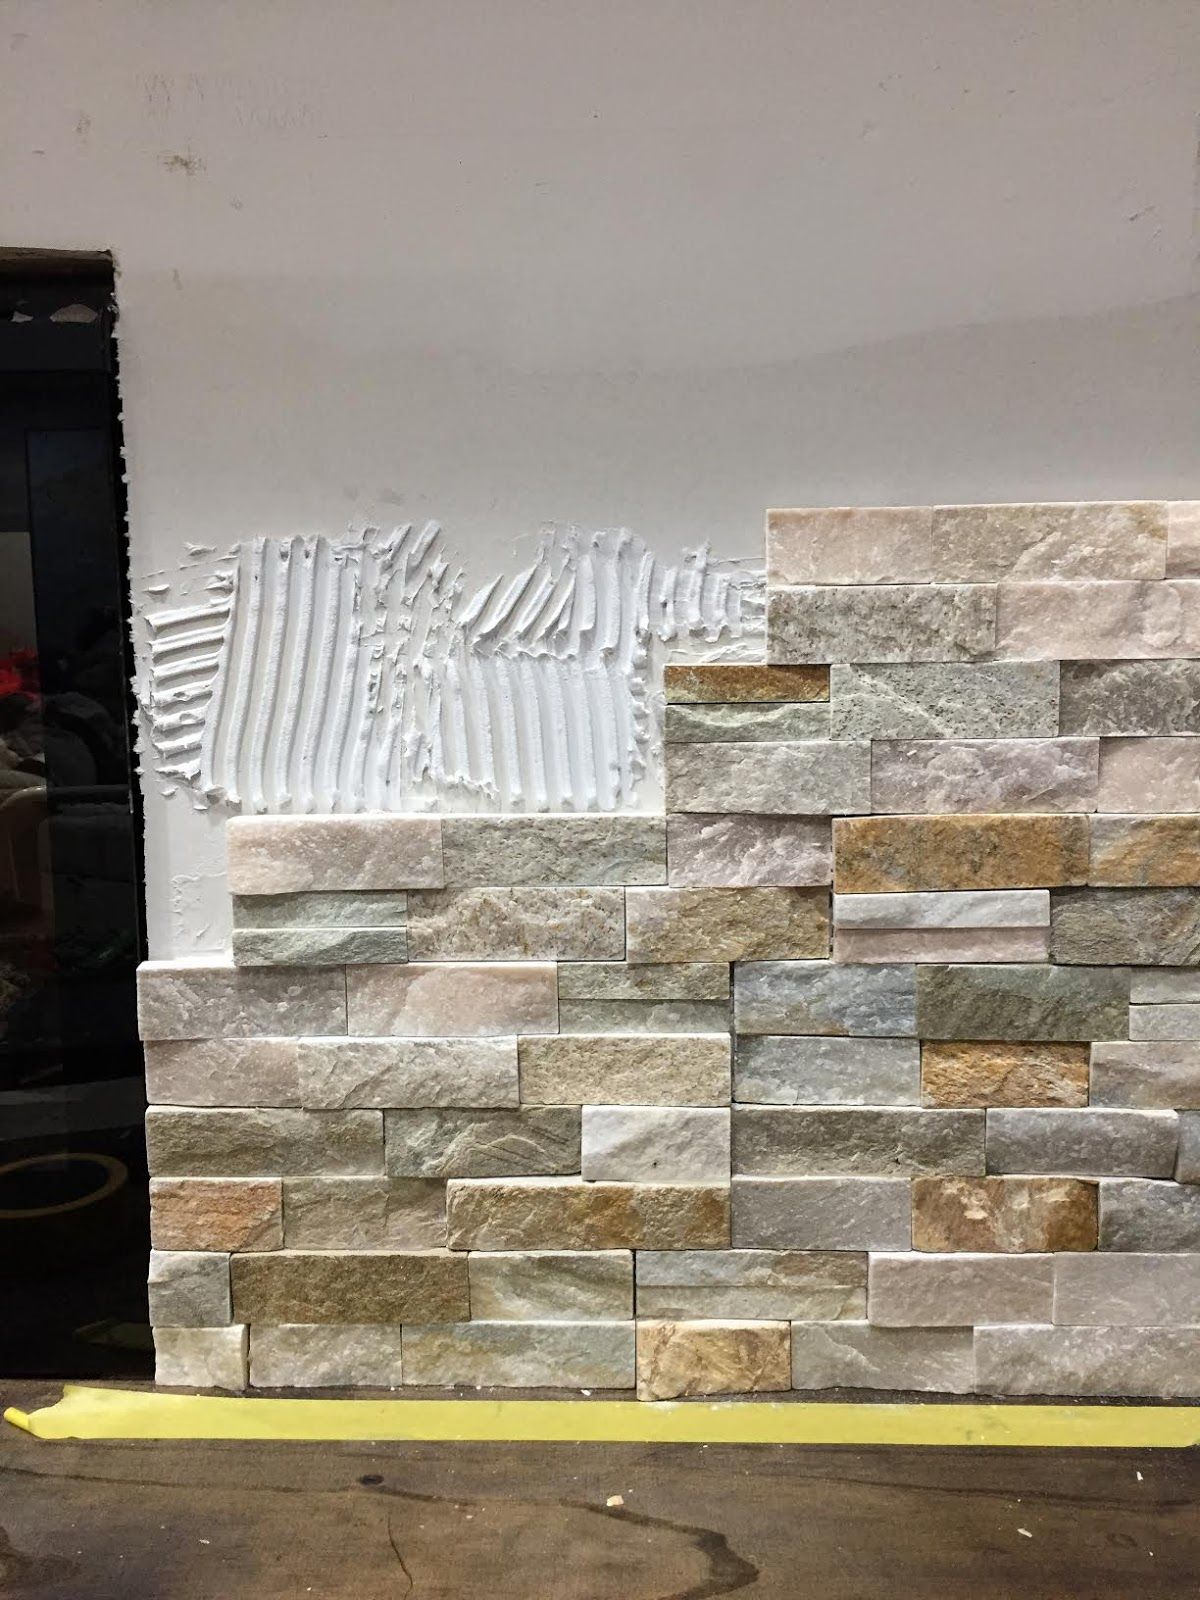 Fireplace Wall Ideas Photos Elegant How to Install Stacked Stone Tile On A Fireplace Wall